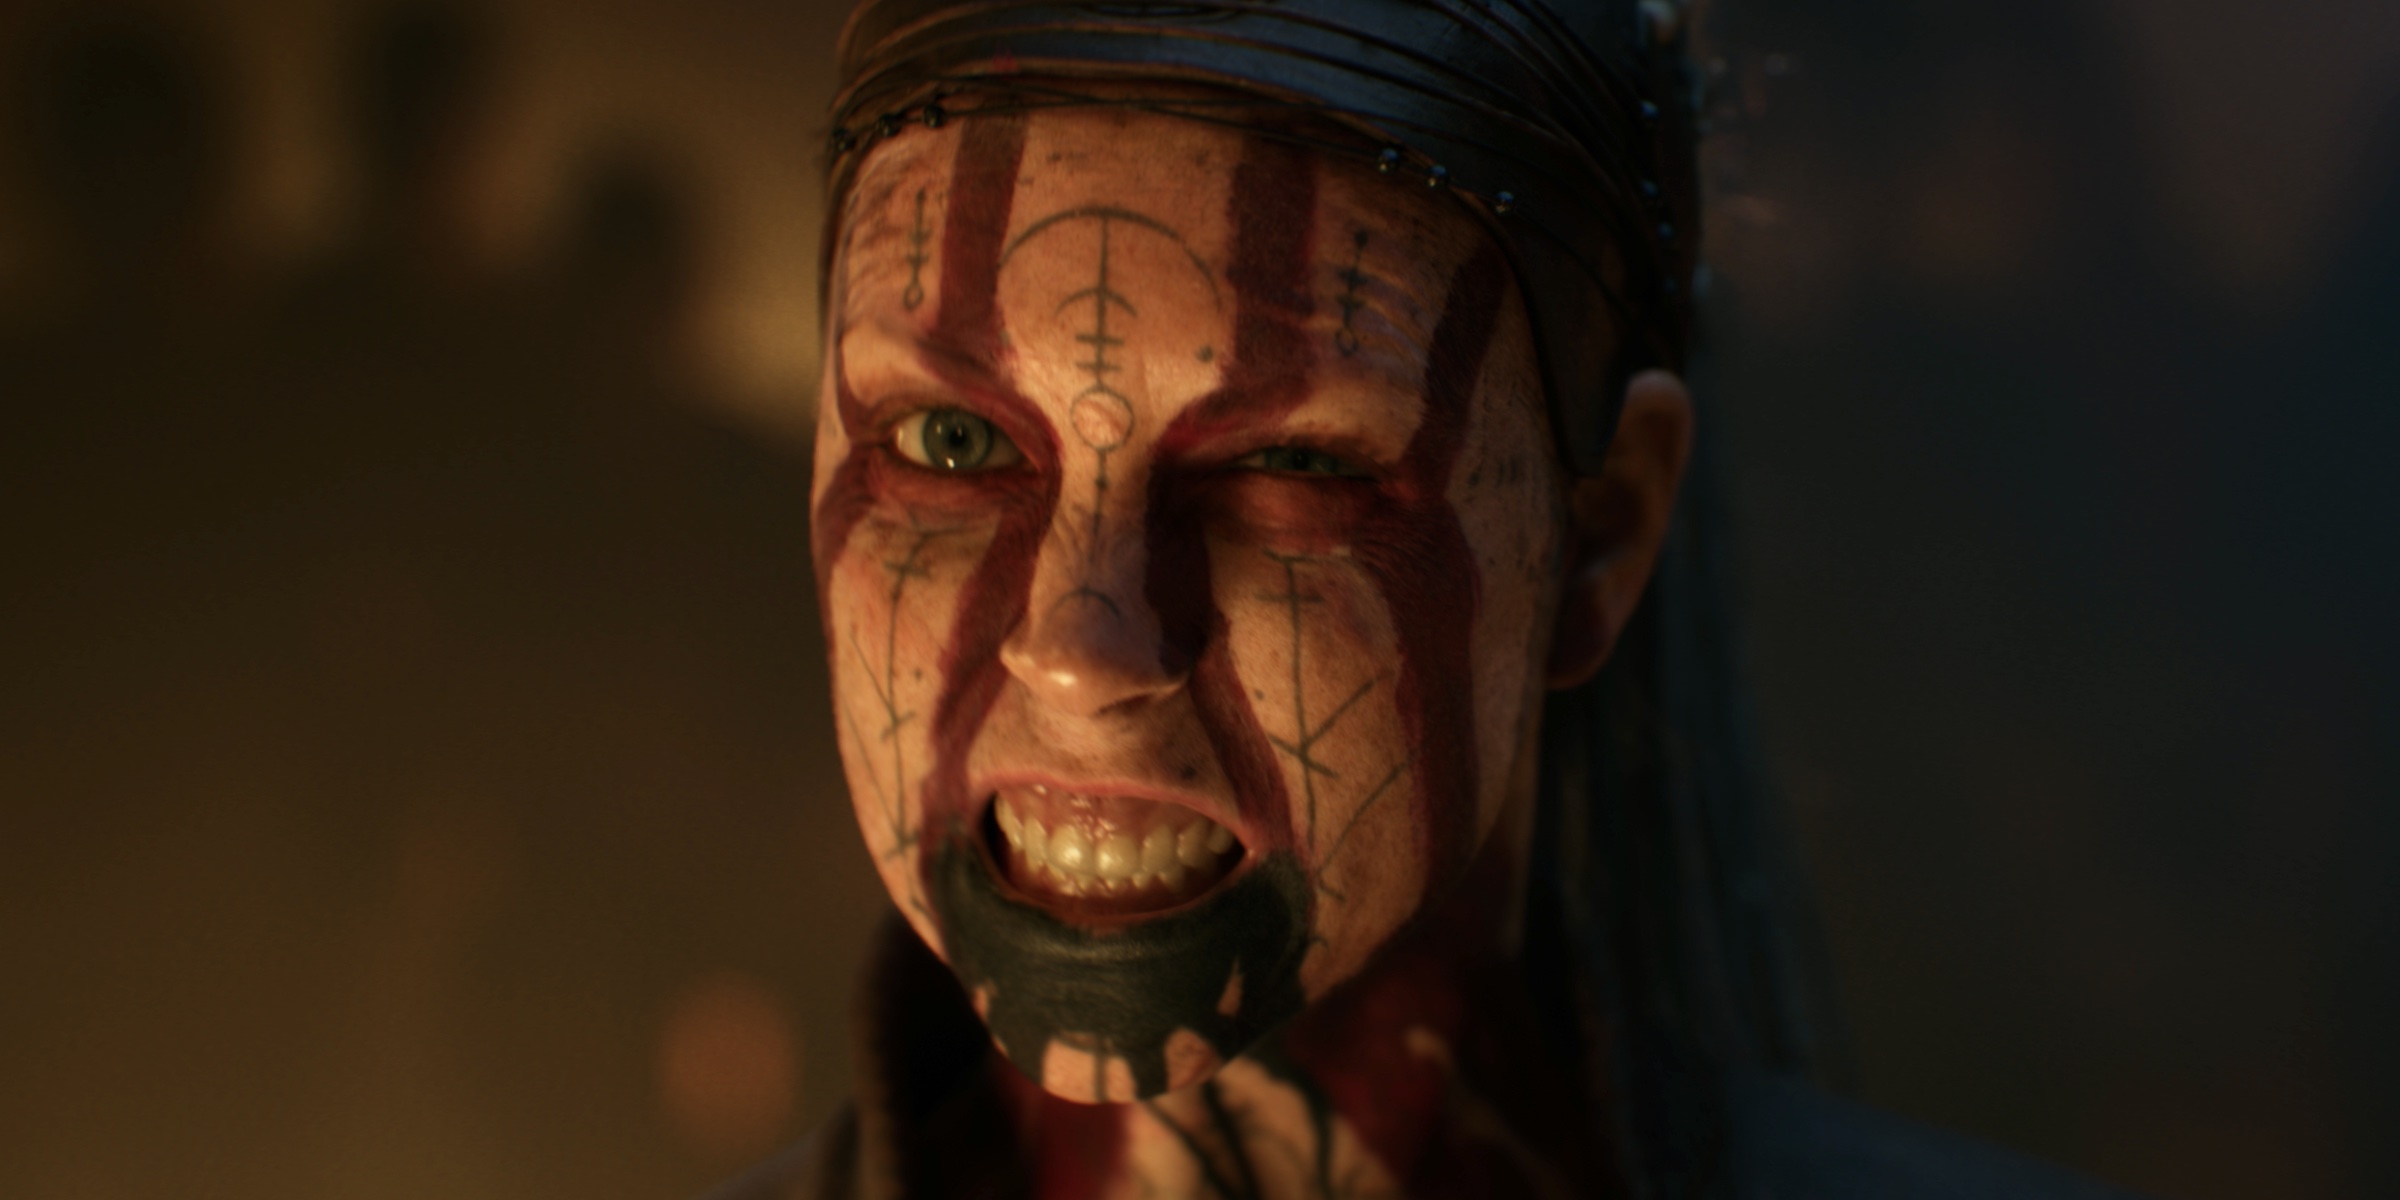 Ninja Theory gives an update on Hellblade 2, which seems far away